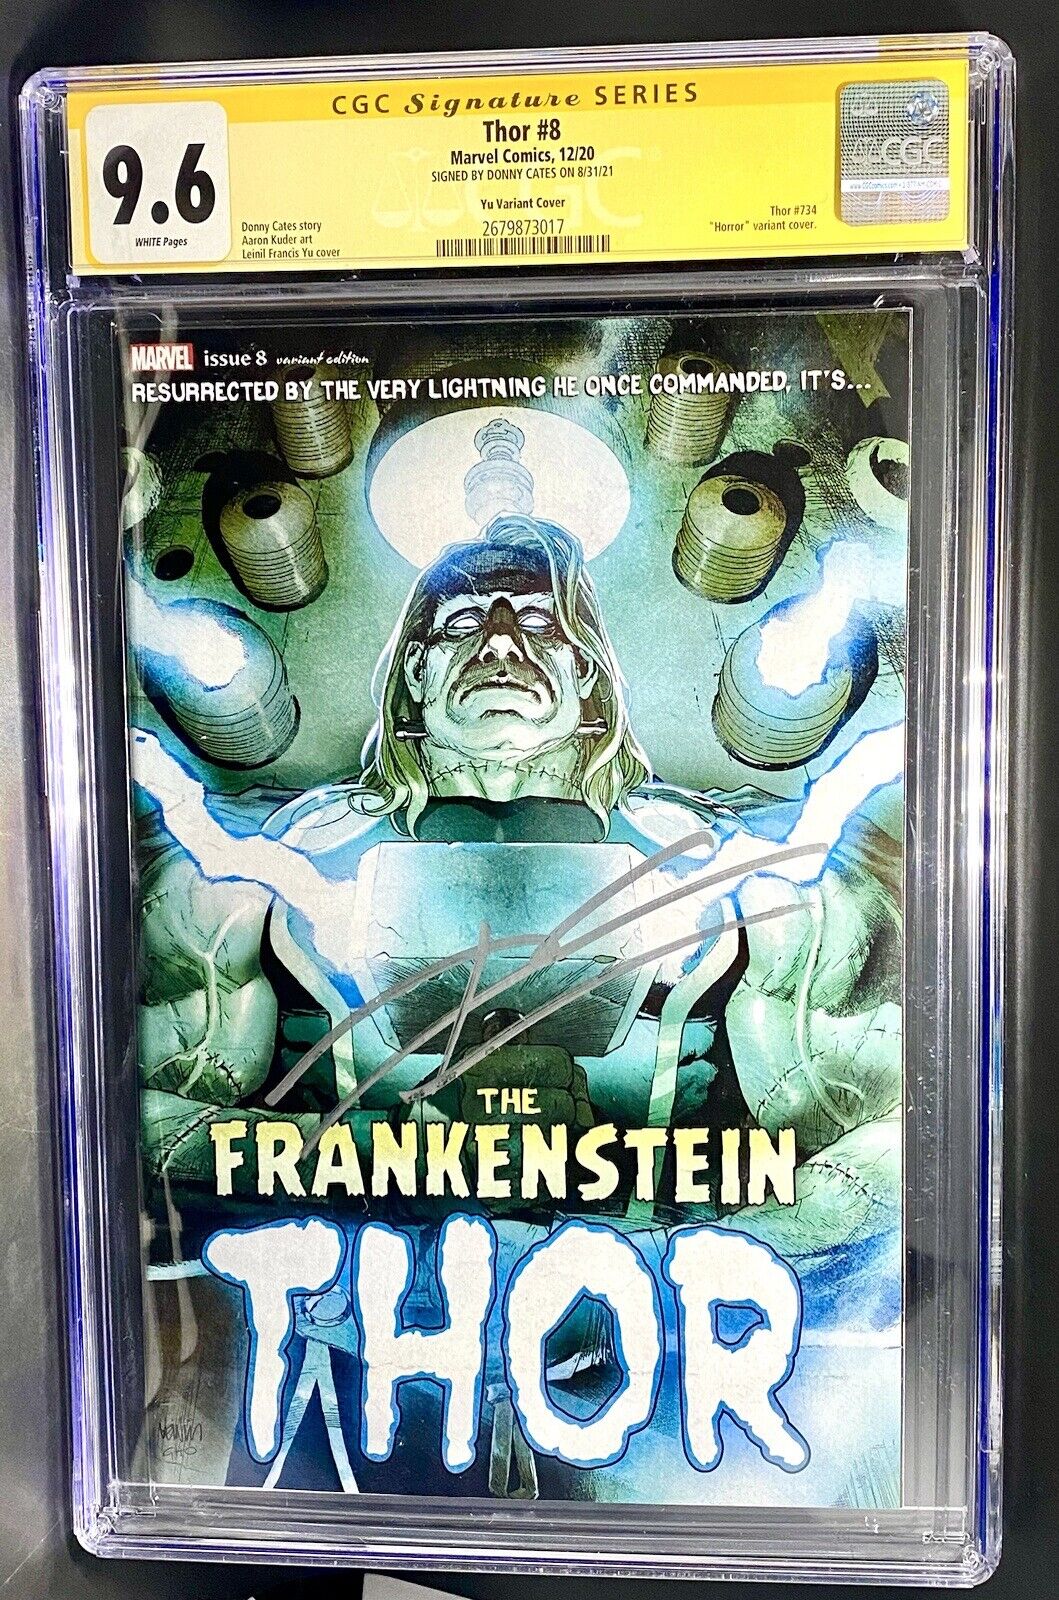 THOR #8 2020 DONNY CATES SIGNED (LEINIL YU FRANKENSTEIN VARIANT) CGC 9.6